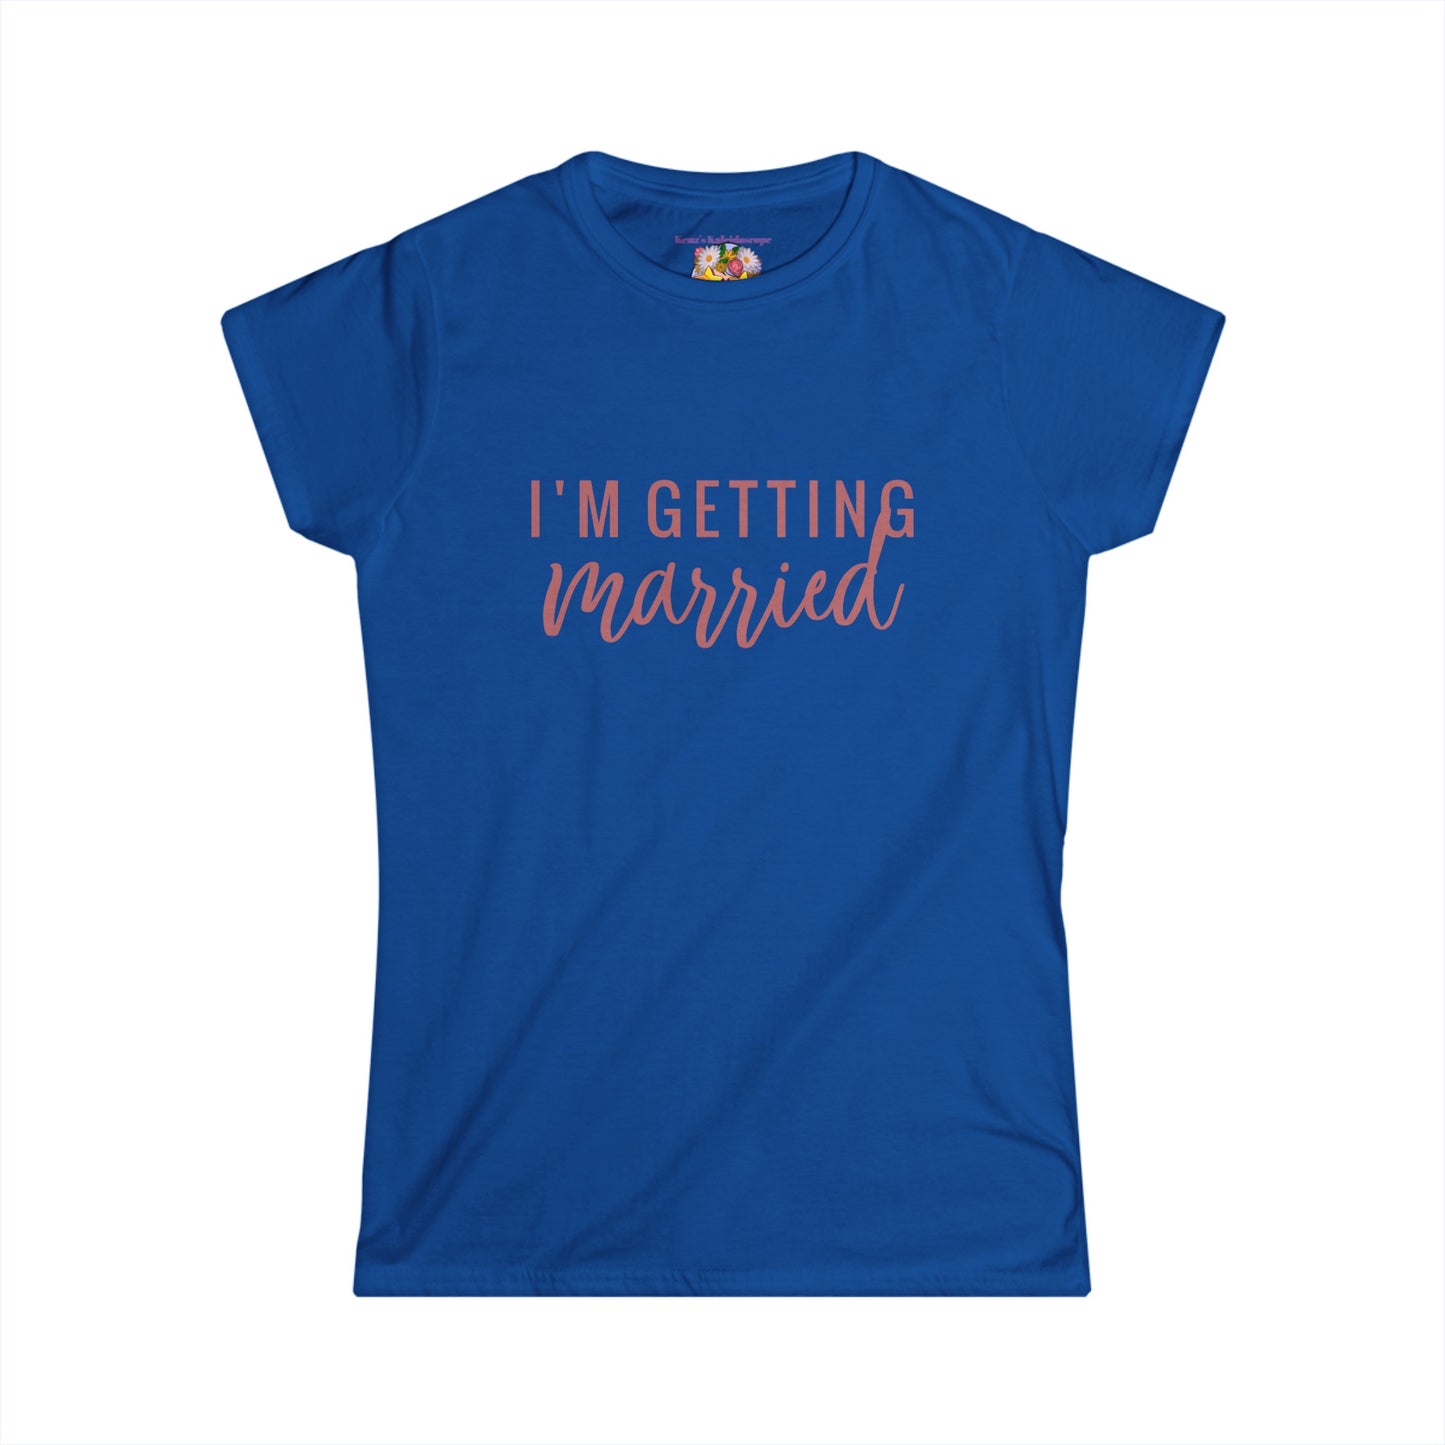 I'm Getting Married Bride, S-2XL, Women's Softstyle Tee